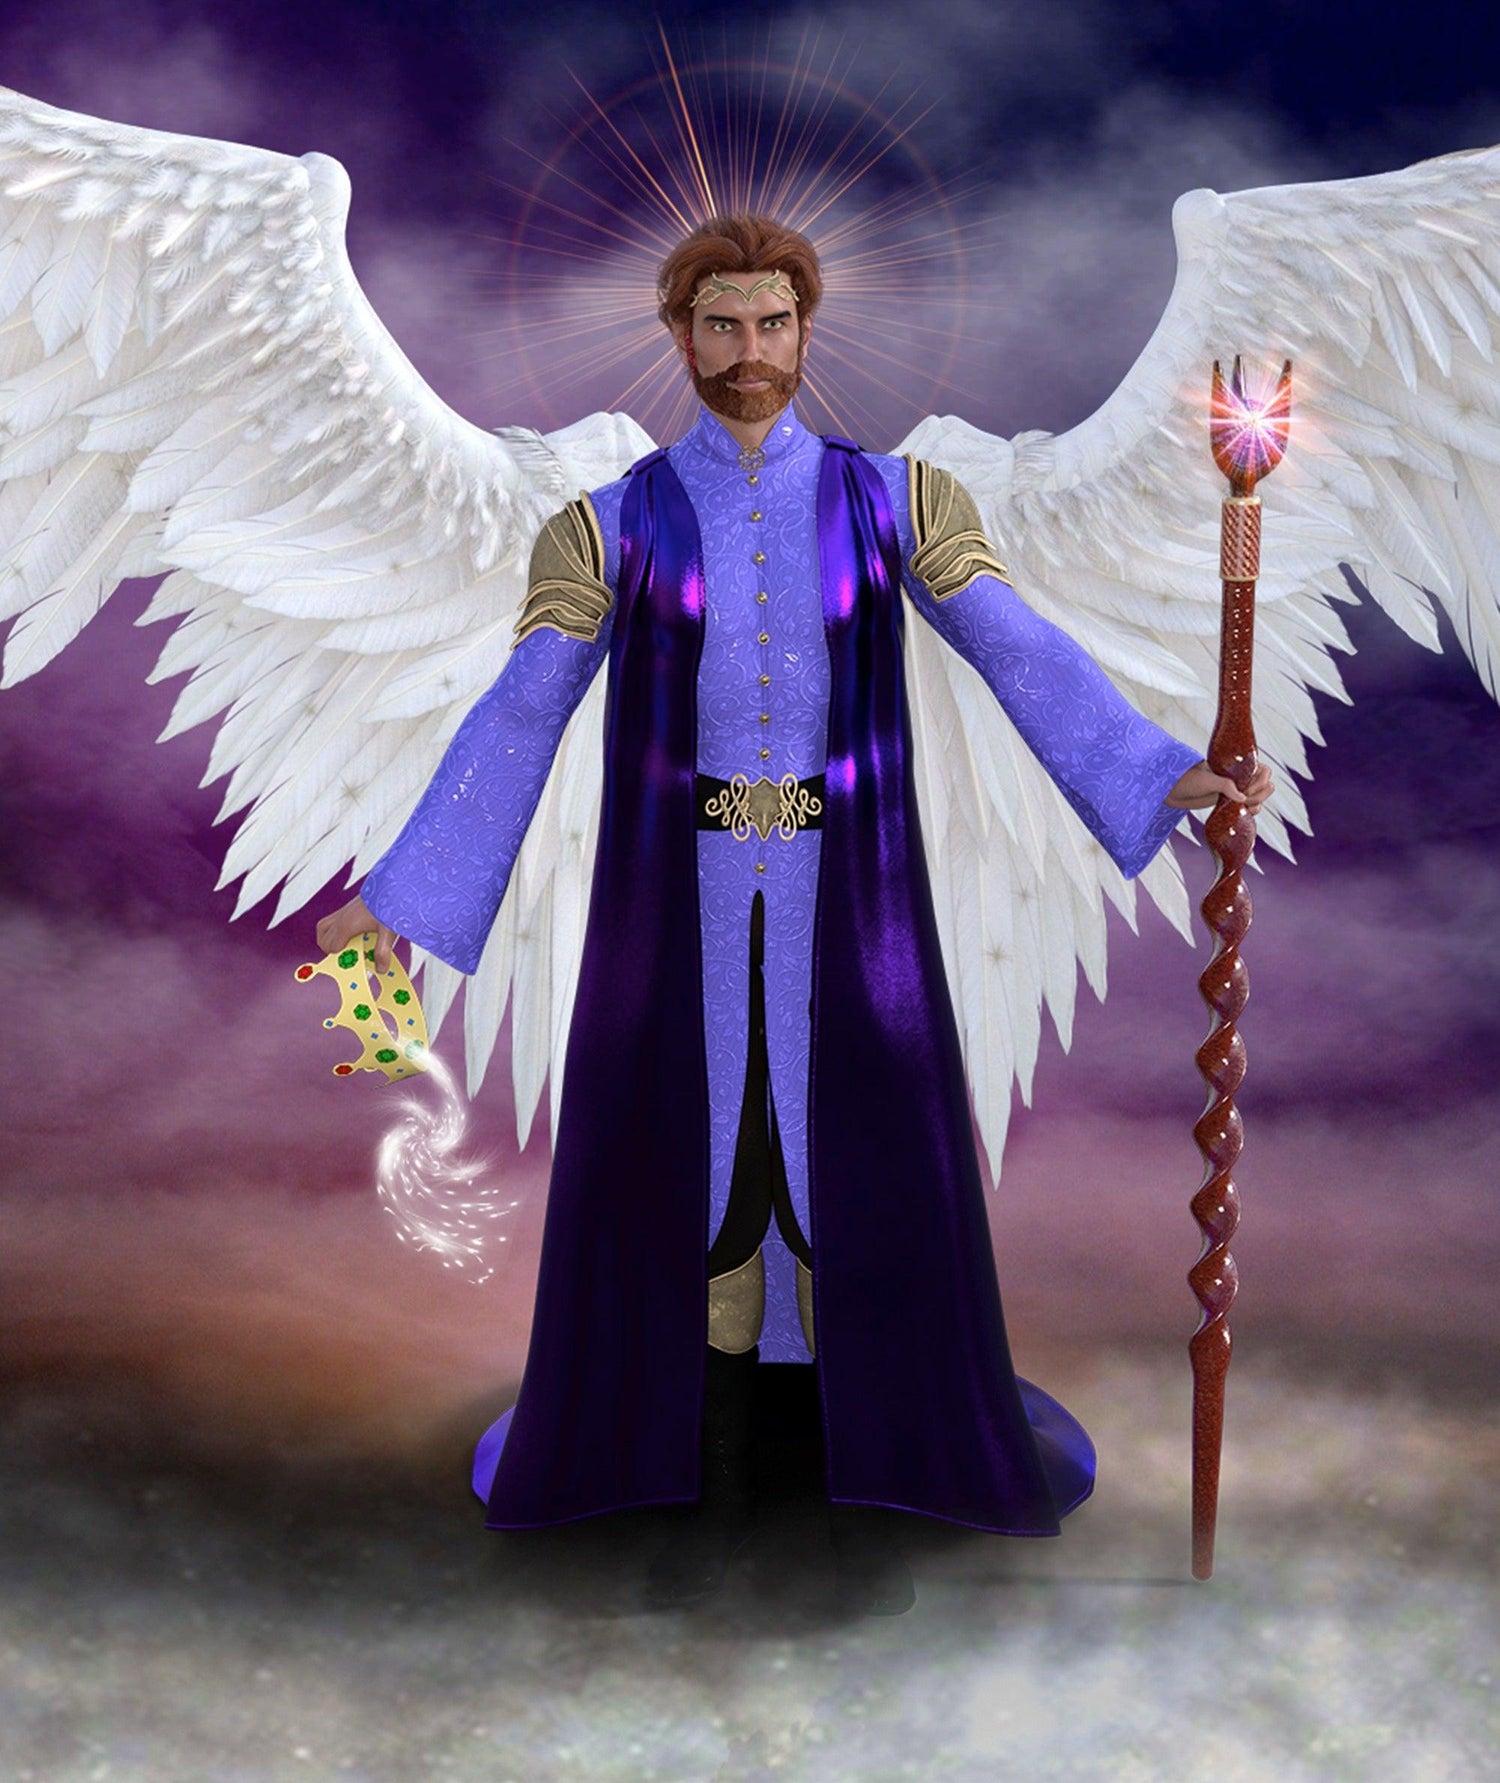 More Than Charms Archangel Jegudiel Jegudiel means Laudation / praise of God. Archangel Jegudiel is the patron of all who work in some field of endeavour. He is often depicted holding a crown in one hand and a staff in the other. The crown he holds symbol